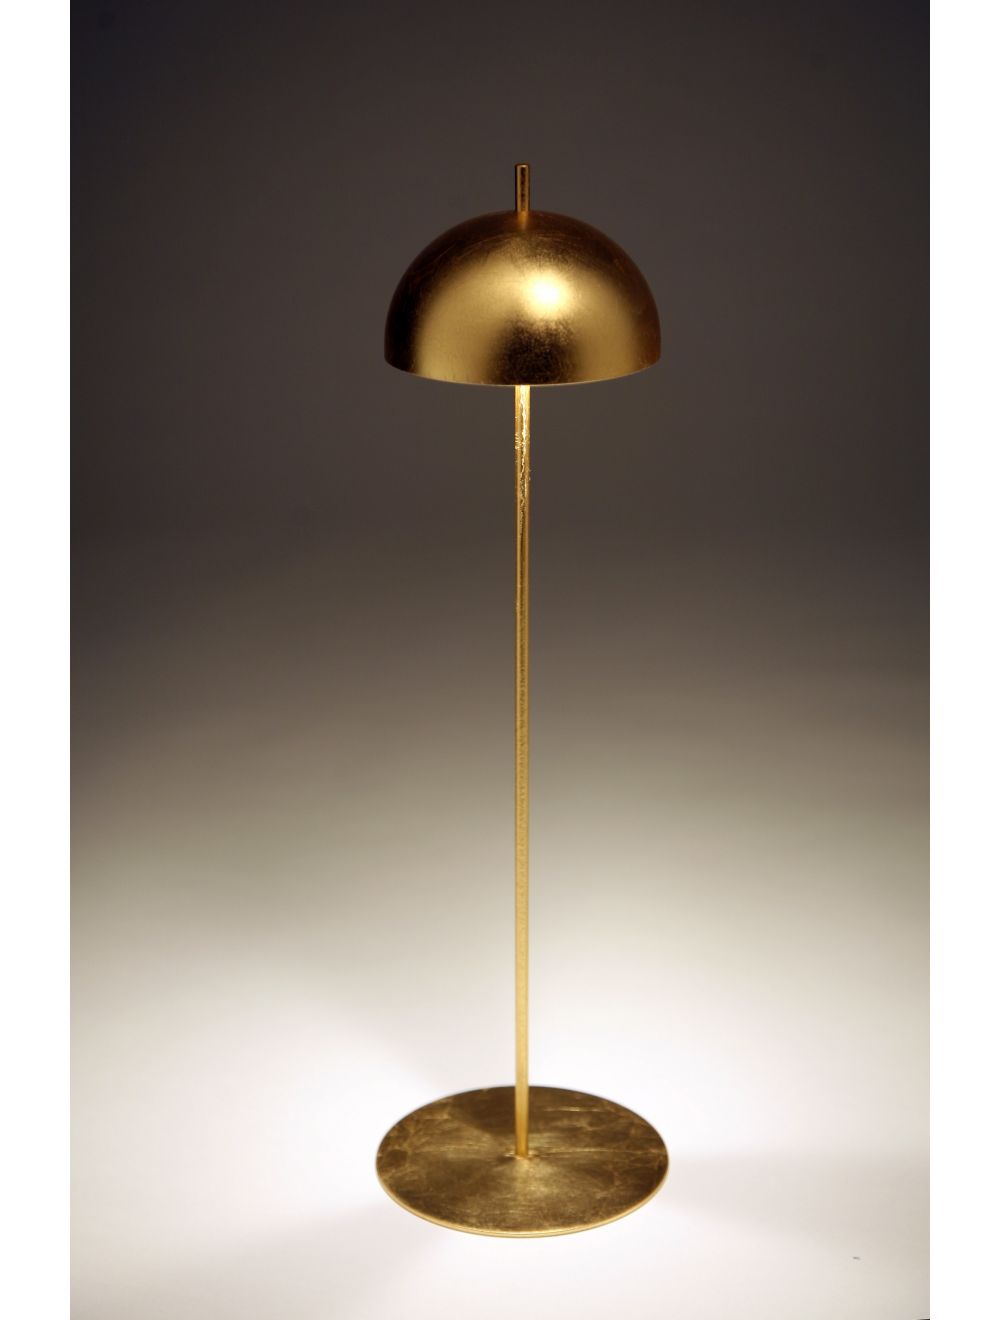 Battery Operated Table Lamp Ombelìn By, Can You Get Battery Operated Table Lamps